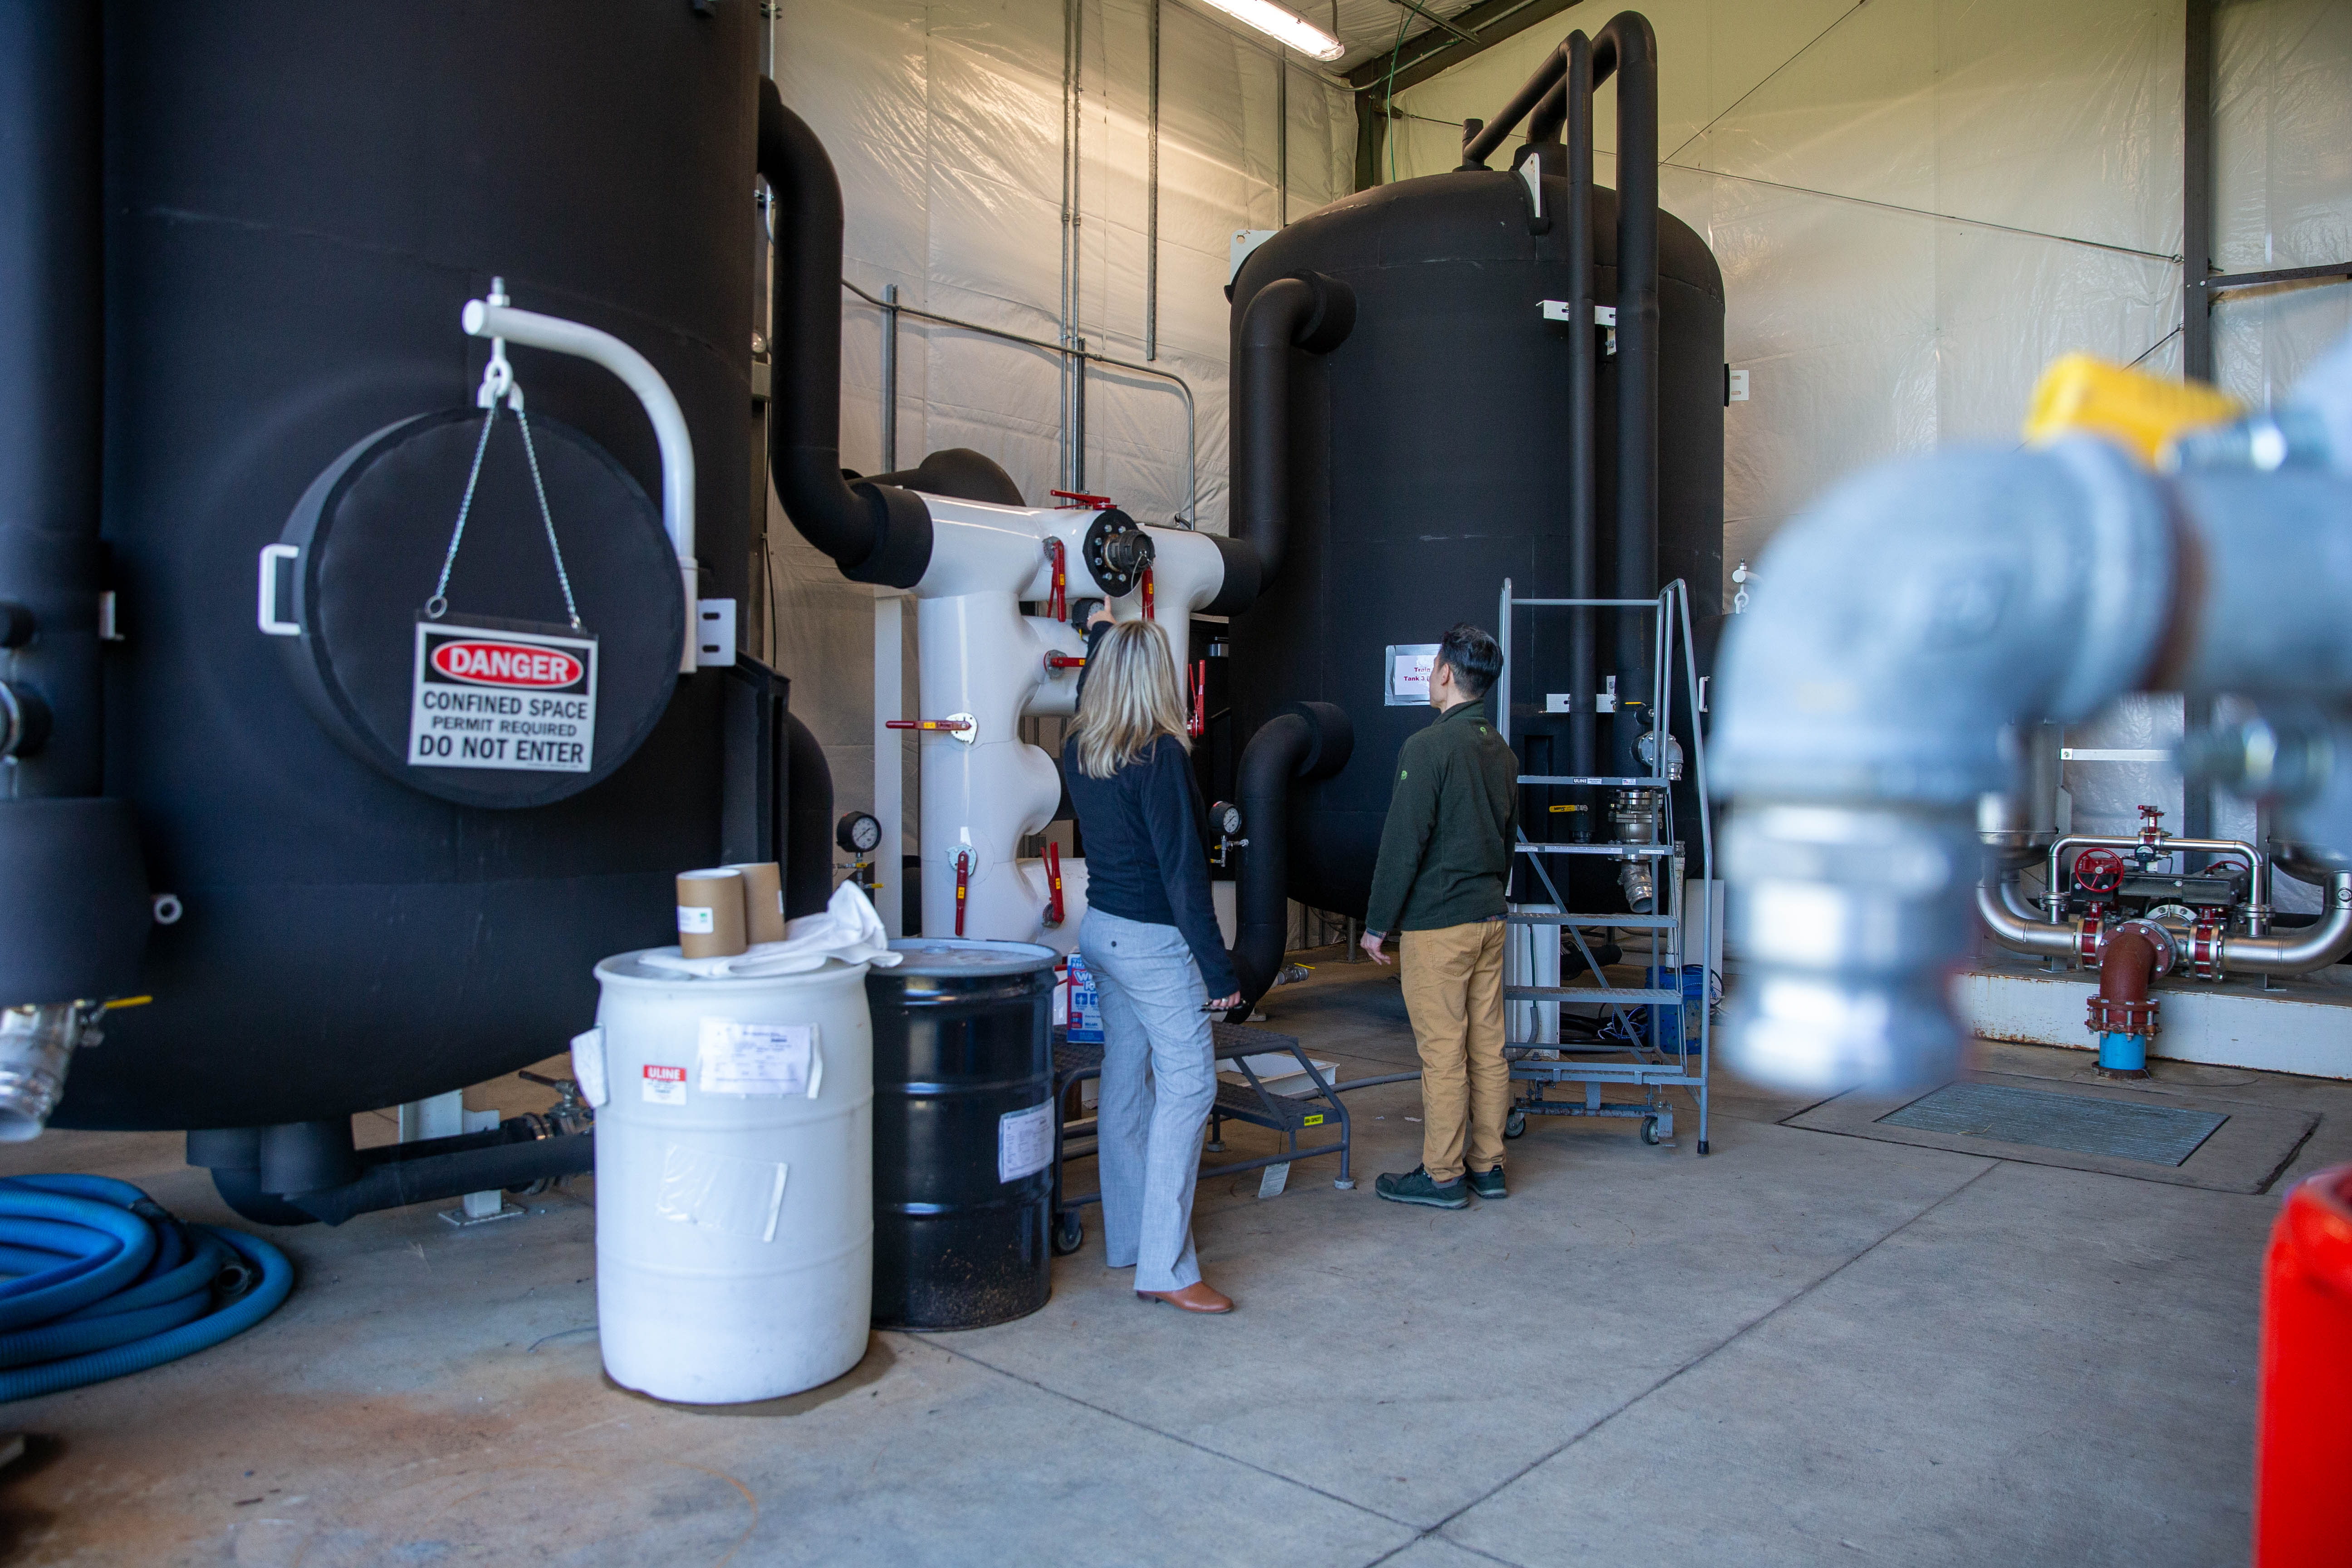 Two people look at a gauge between two large, black tanks. The tanks have two large pipes leading toward a center location. A "DANGER Confined Space" sign hangs in front of the tank.